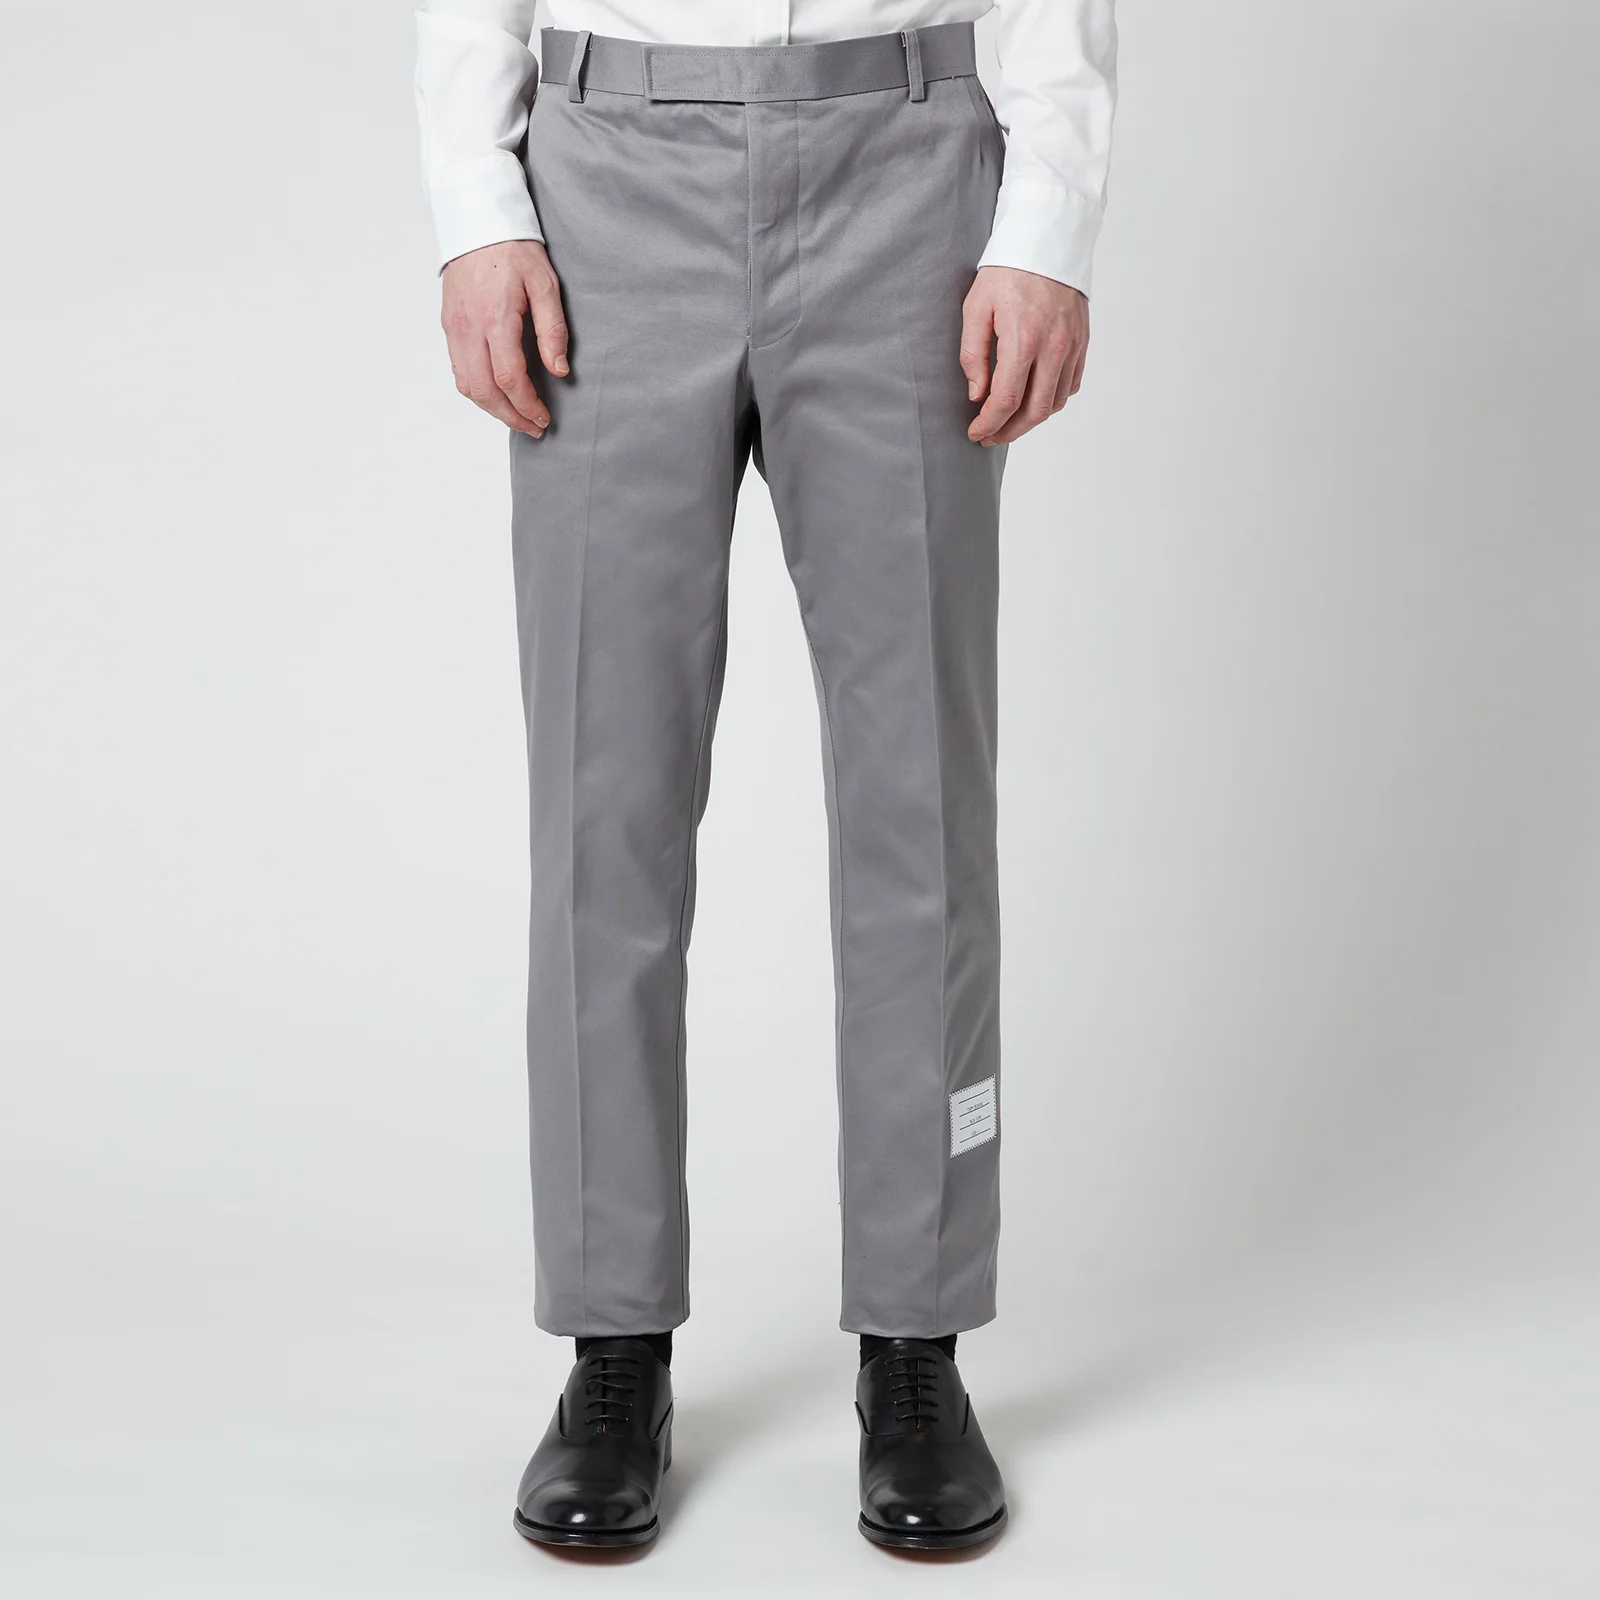 Thom Browne Men's Unconstructed Chino Trousers - Medium Grey Image 1